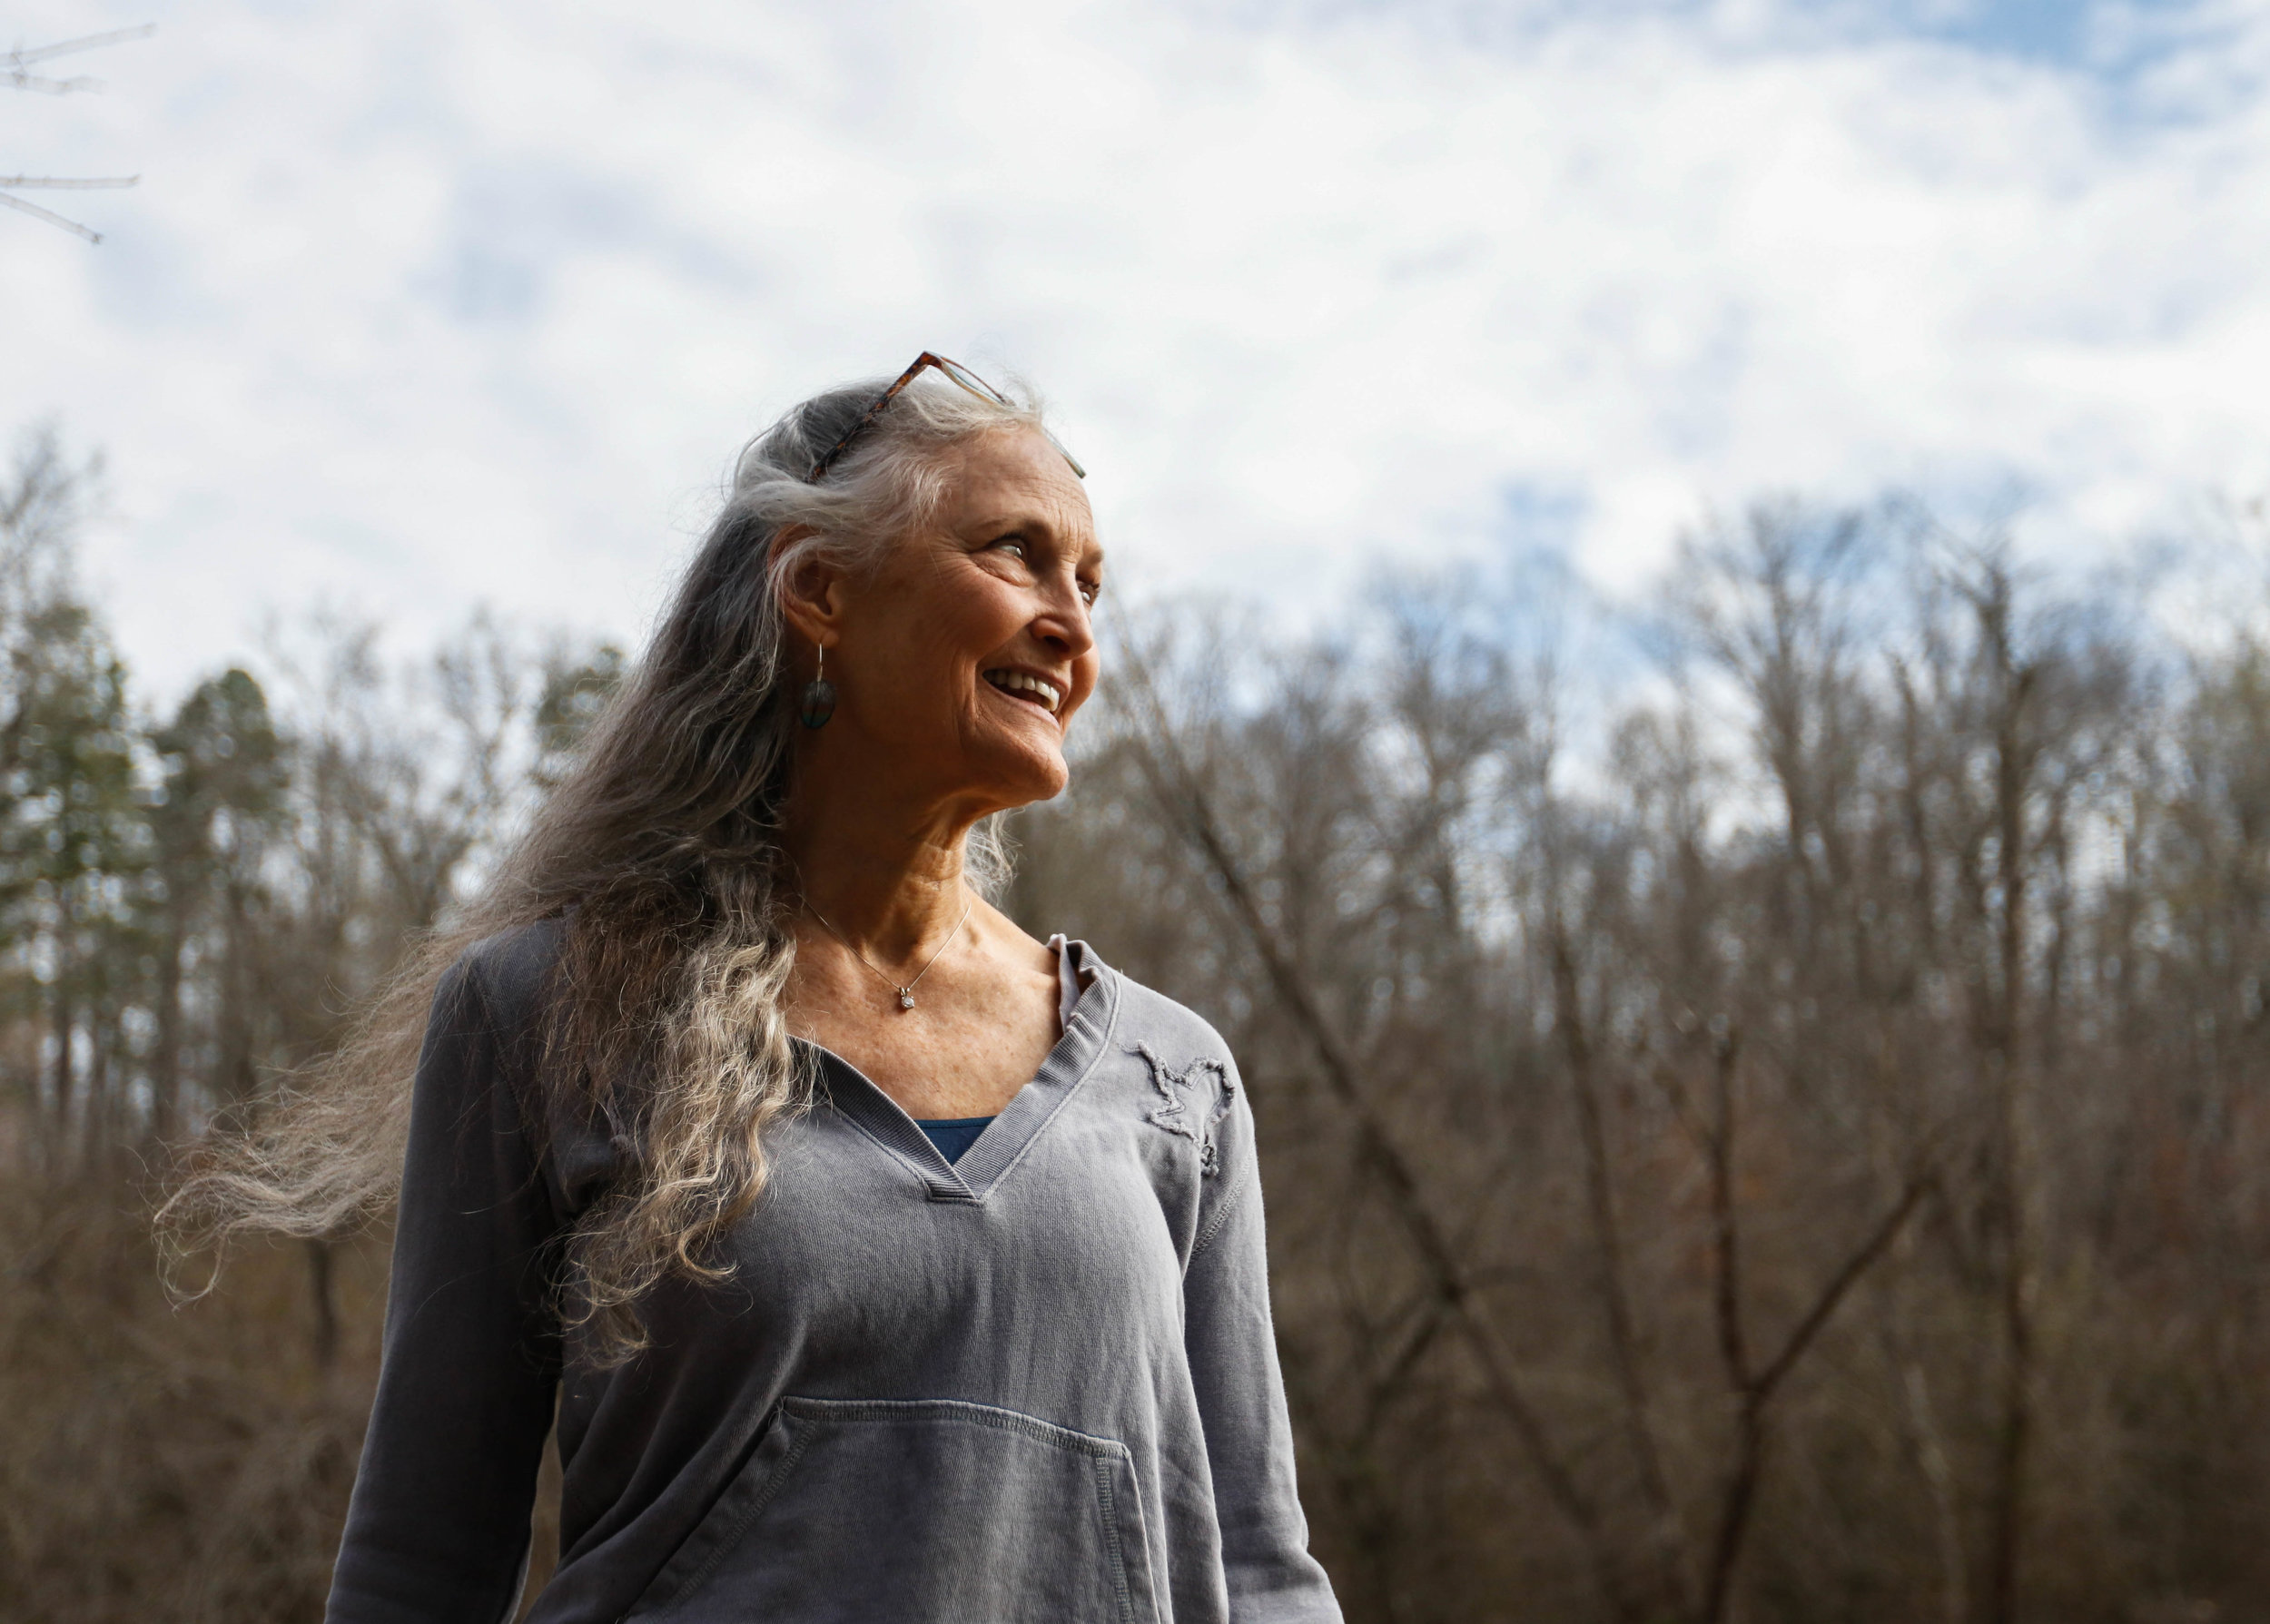  Tinsley breathes in the fresh air by the Middle Oconee River, in Bogart, Georgia on Saturday, Feb. 24, 2018. A portion of Earthsong’s electricity is powered by the river's flow, but more important to Tinsley is the sense of healing she feels wheneve